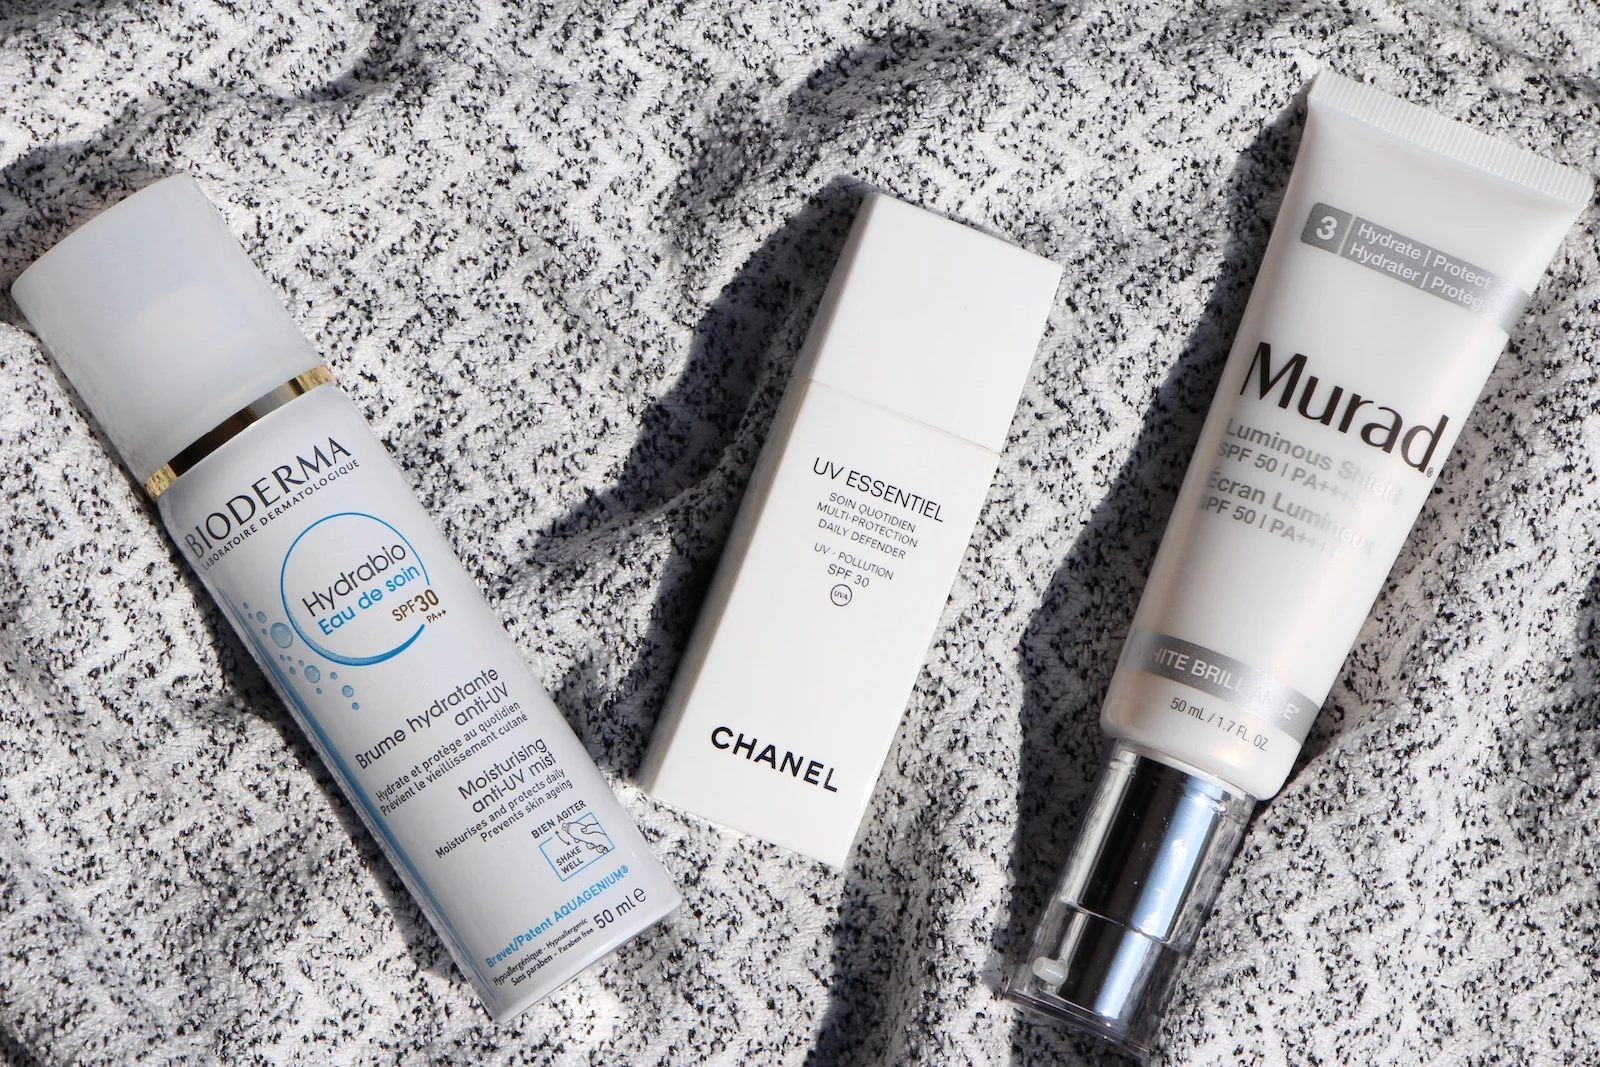 Three New Sunscreens You’ll Want To Wear…